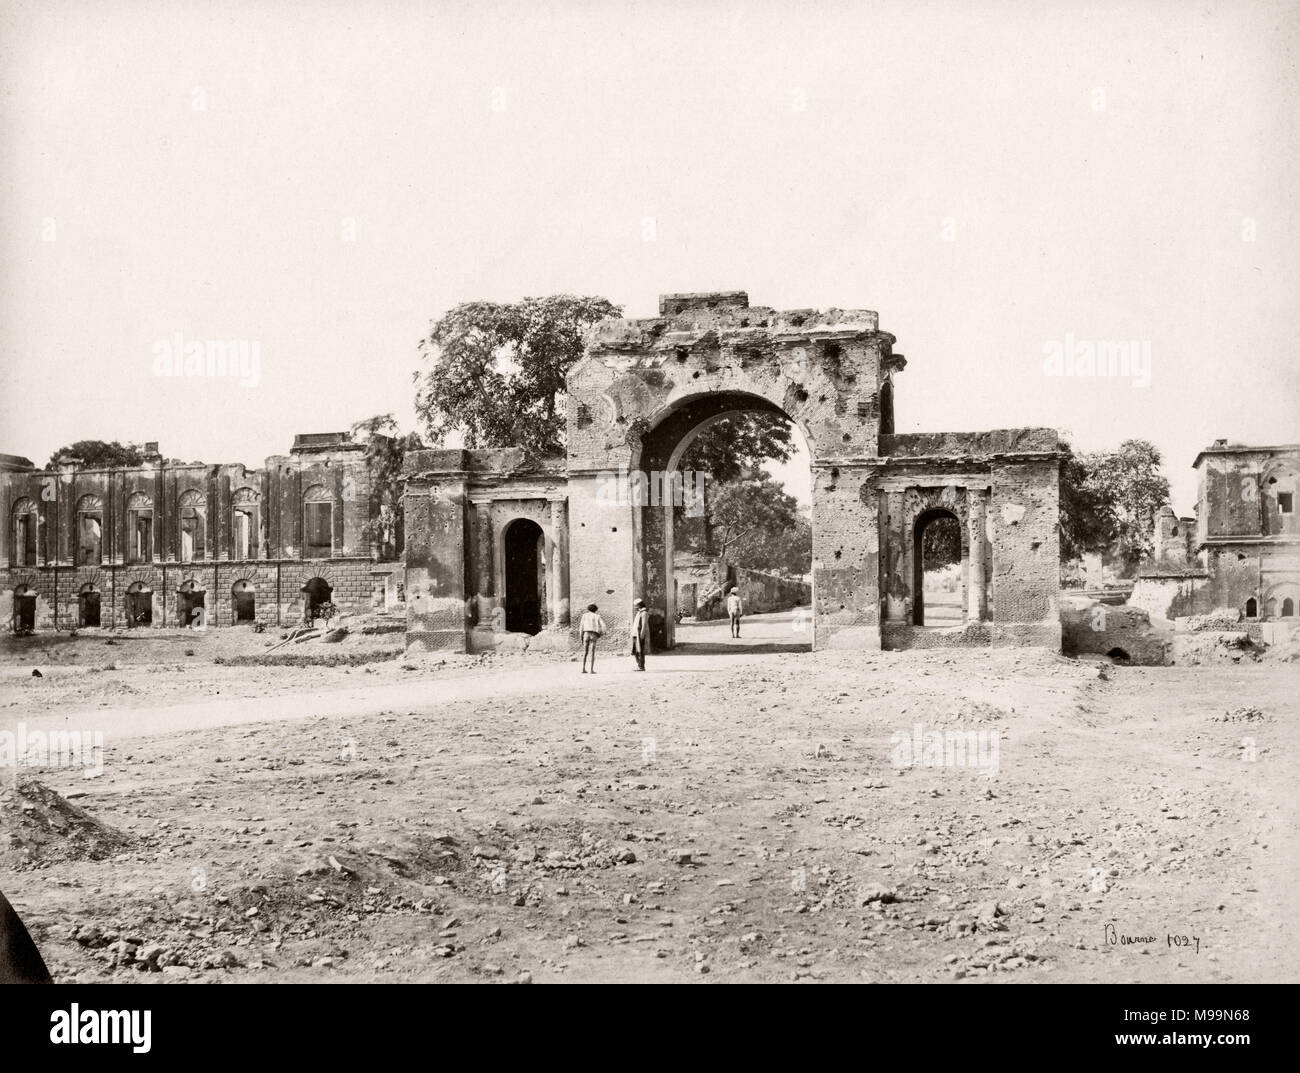 19th century vintage photograph India - the Residency, Lucknow, Samuel Bourne, 1860s Stock Photo